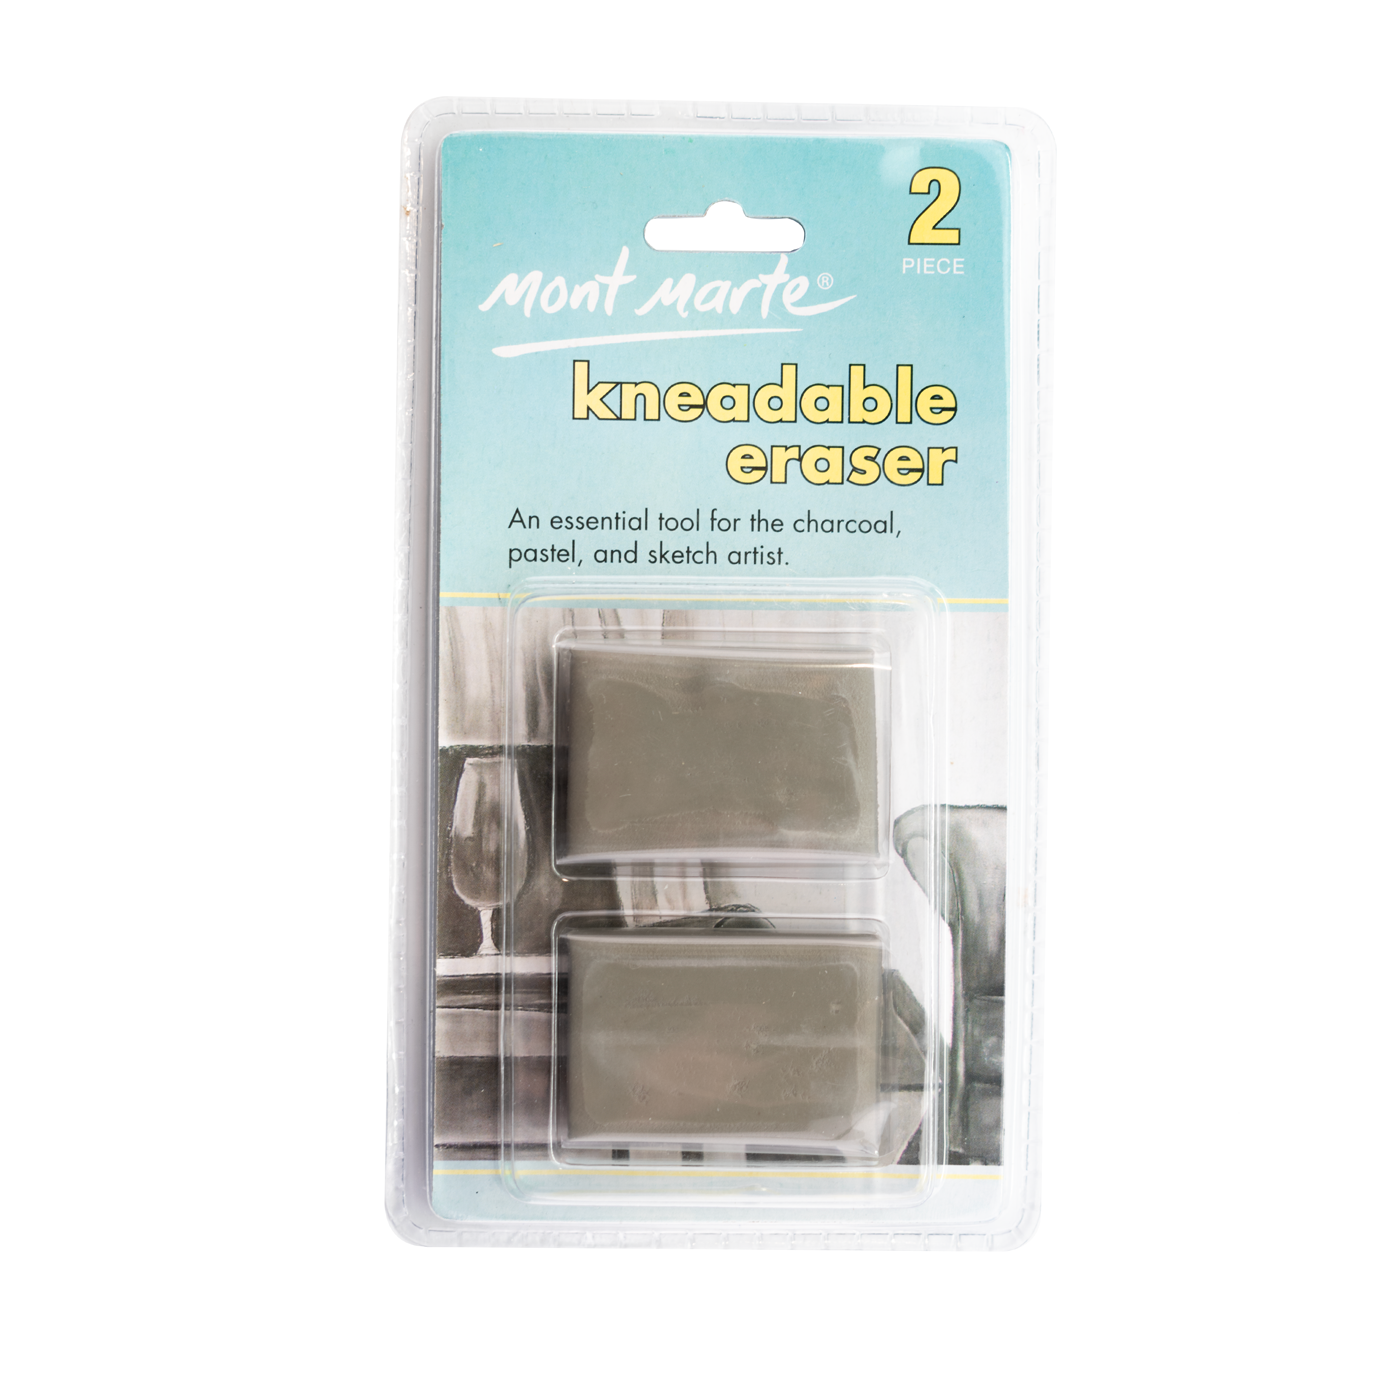 Mont Marte Kneadable Erasers (2PC)